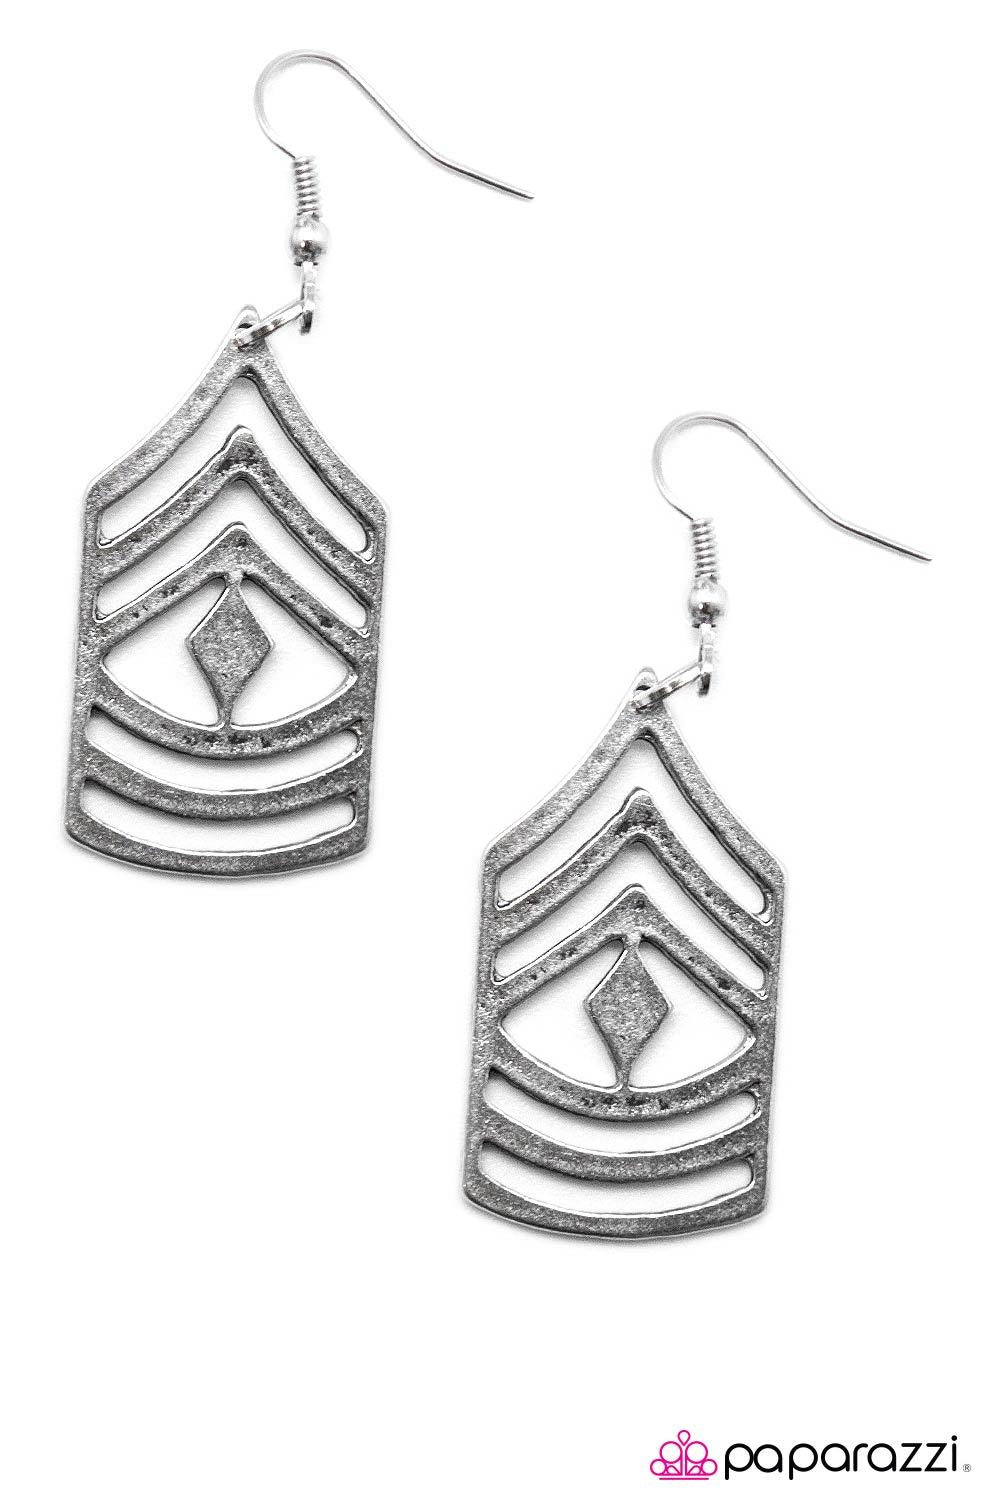 Sir Yes Sir Silver Earrings - Paparazzi Accessories-CarasShop.com - $5 Jewelry by Cara Jewels